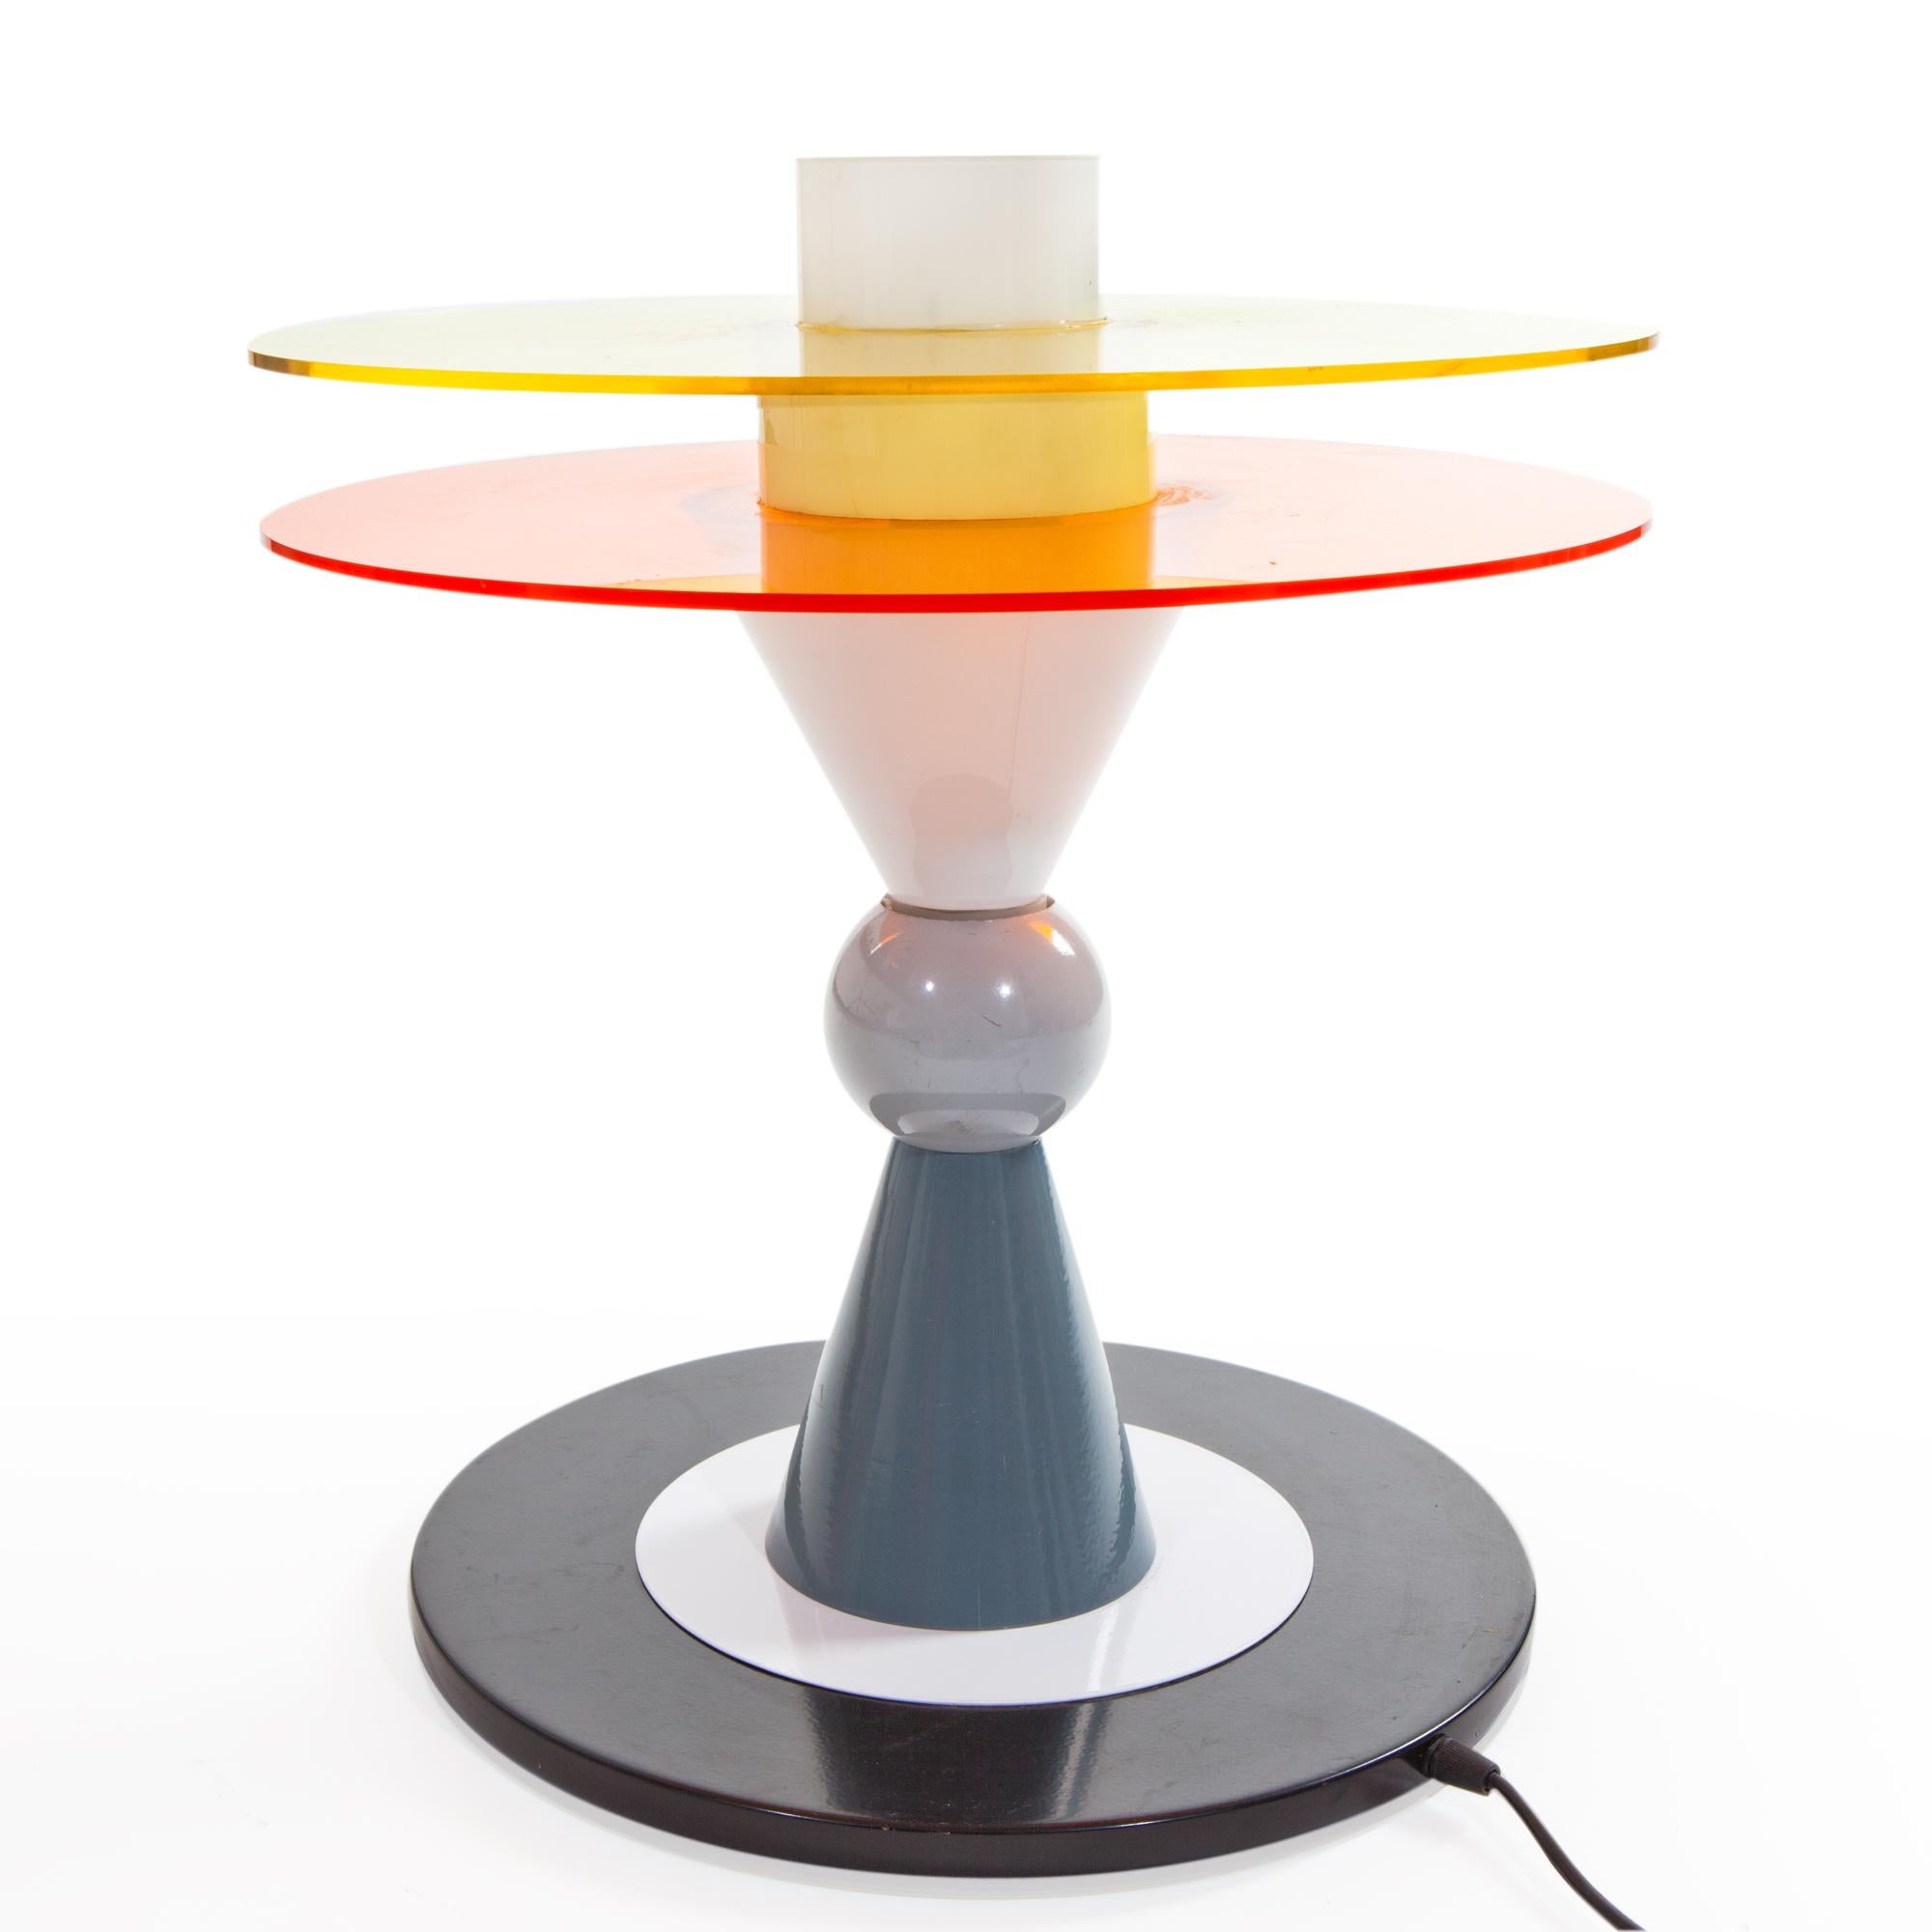 Here you are shown the US wired, Bay Table Lamp in glass, aluminum and plexiglass, designed by Ettore Sottsass in 1983 for Memphis Milano.

Ettore Sottsass was born in Innsbruck in 1917. In 1939 he graduated in architecture at the Politecnico di